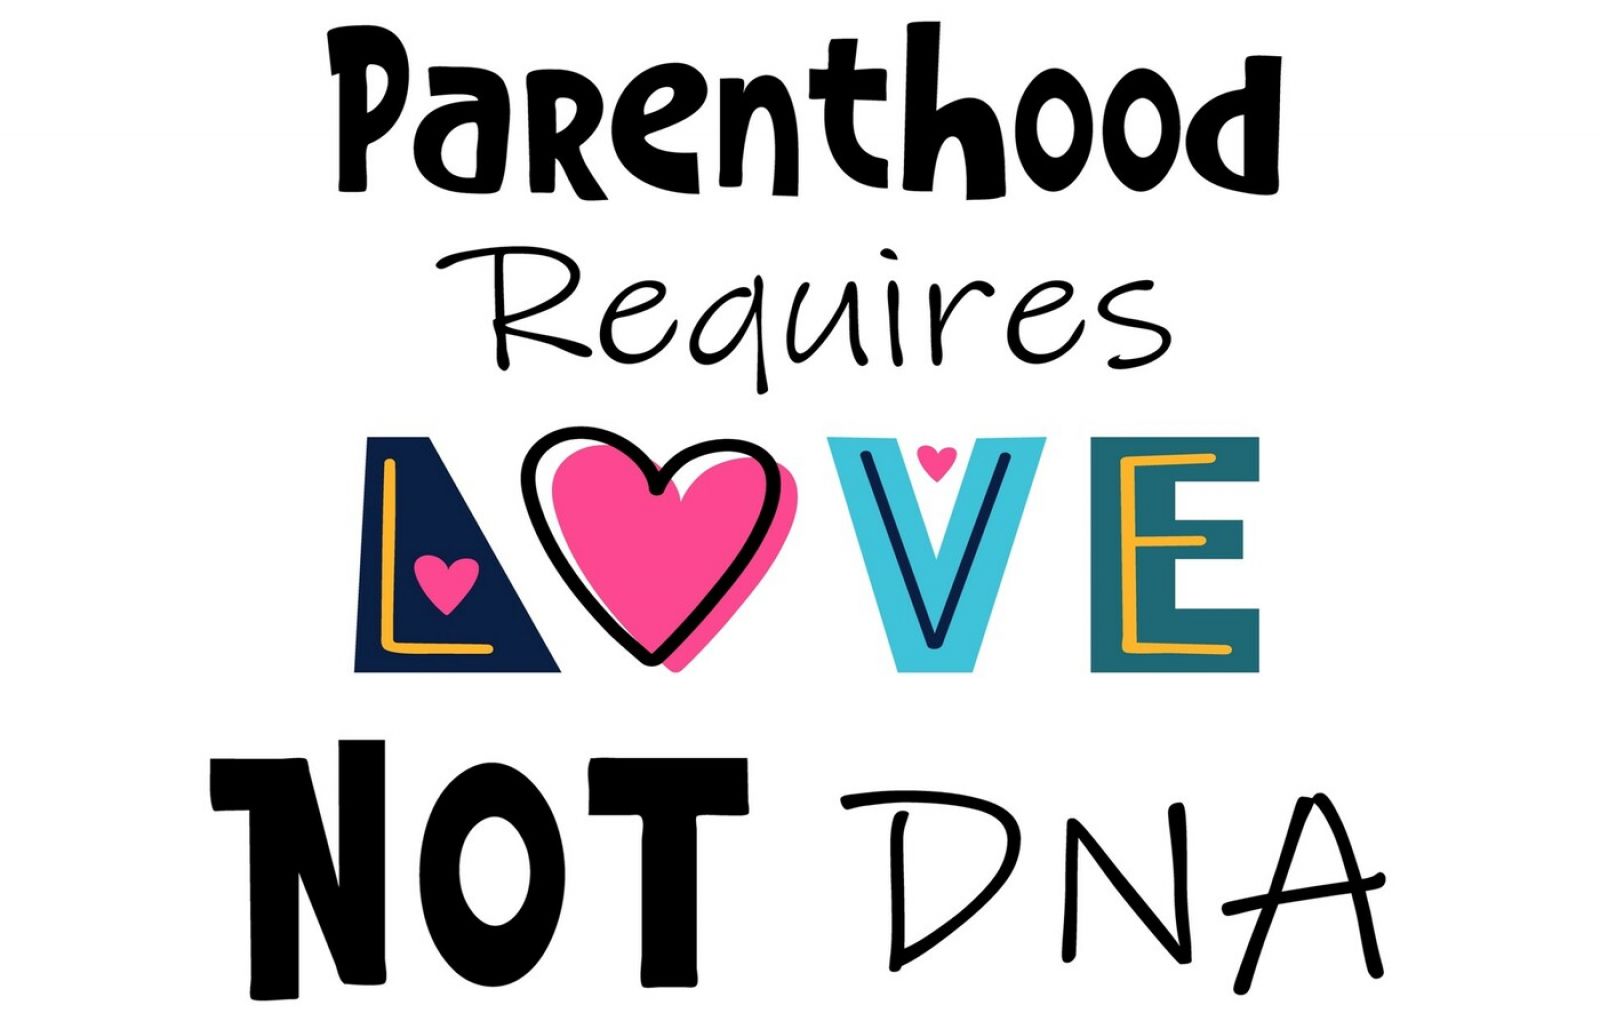 Parenthood Requires Love Not DNA image banner image